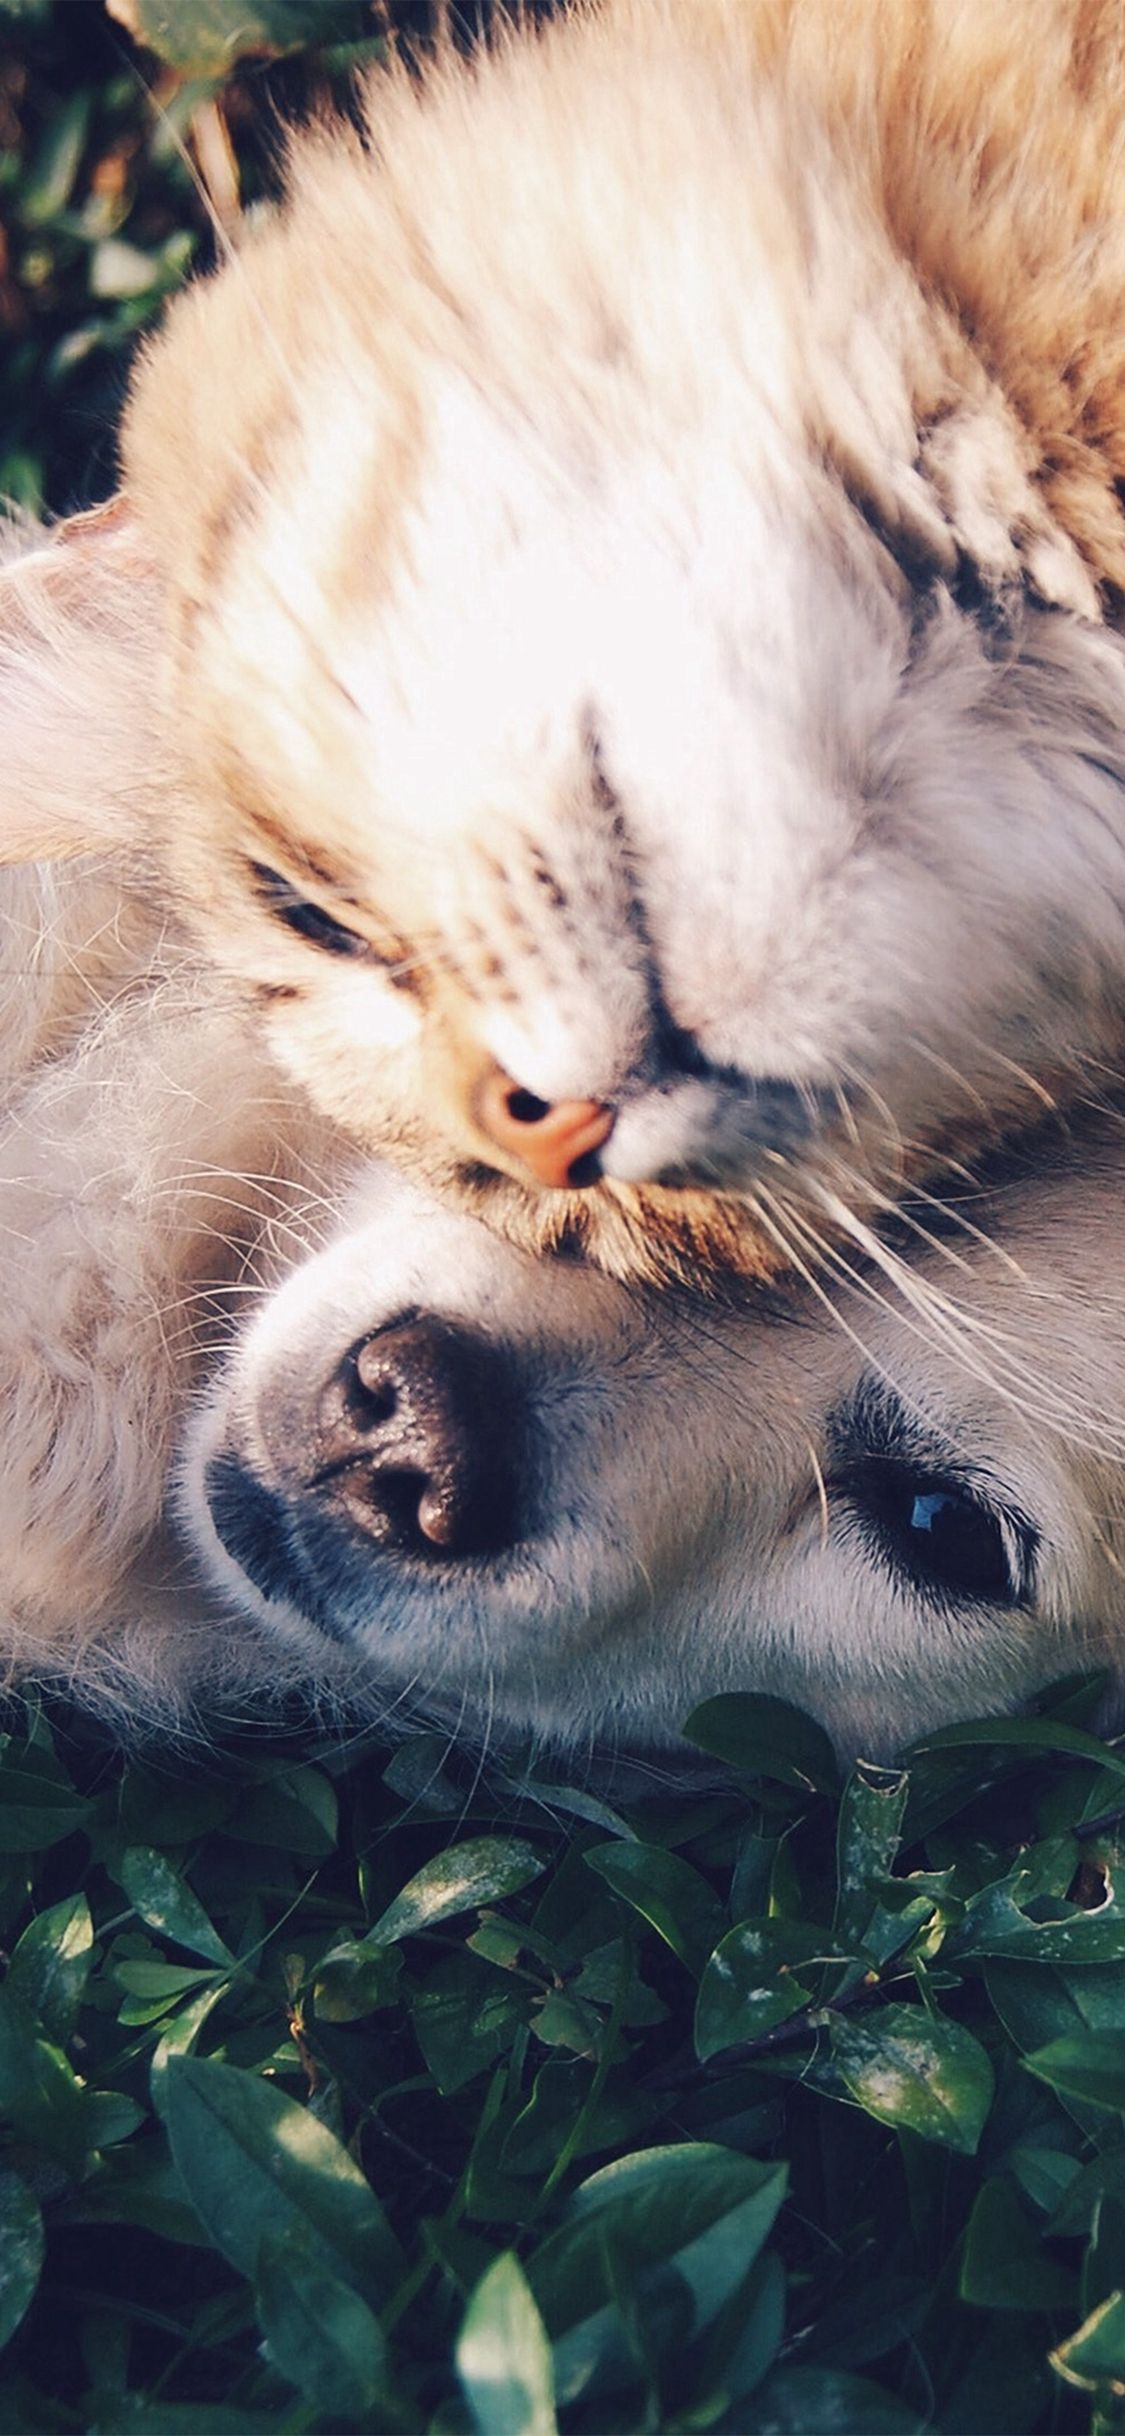 1125x2436 Cat And Dog Animal Love Nature Pure #iPhone #X #wallpaper | Cat training, Cats, Pets cats